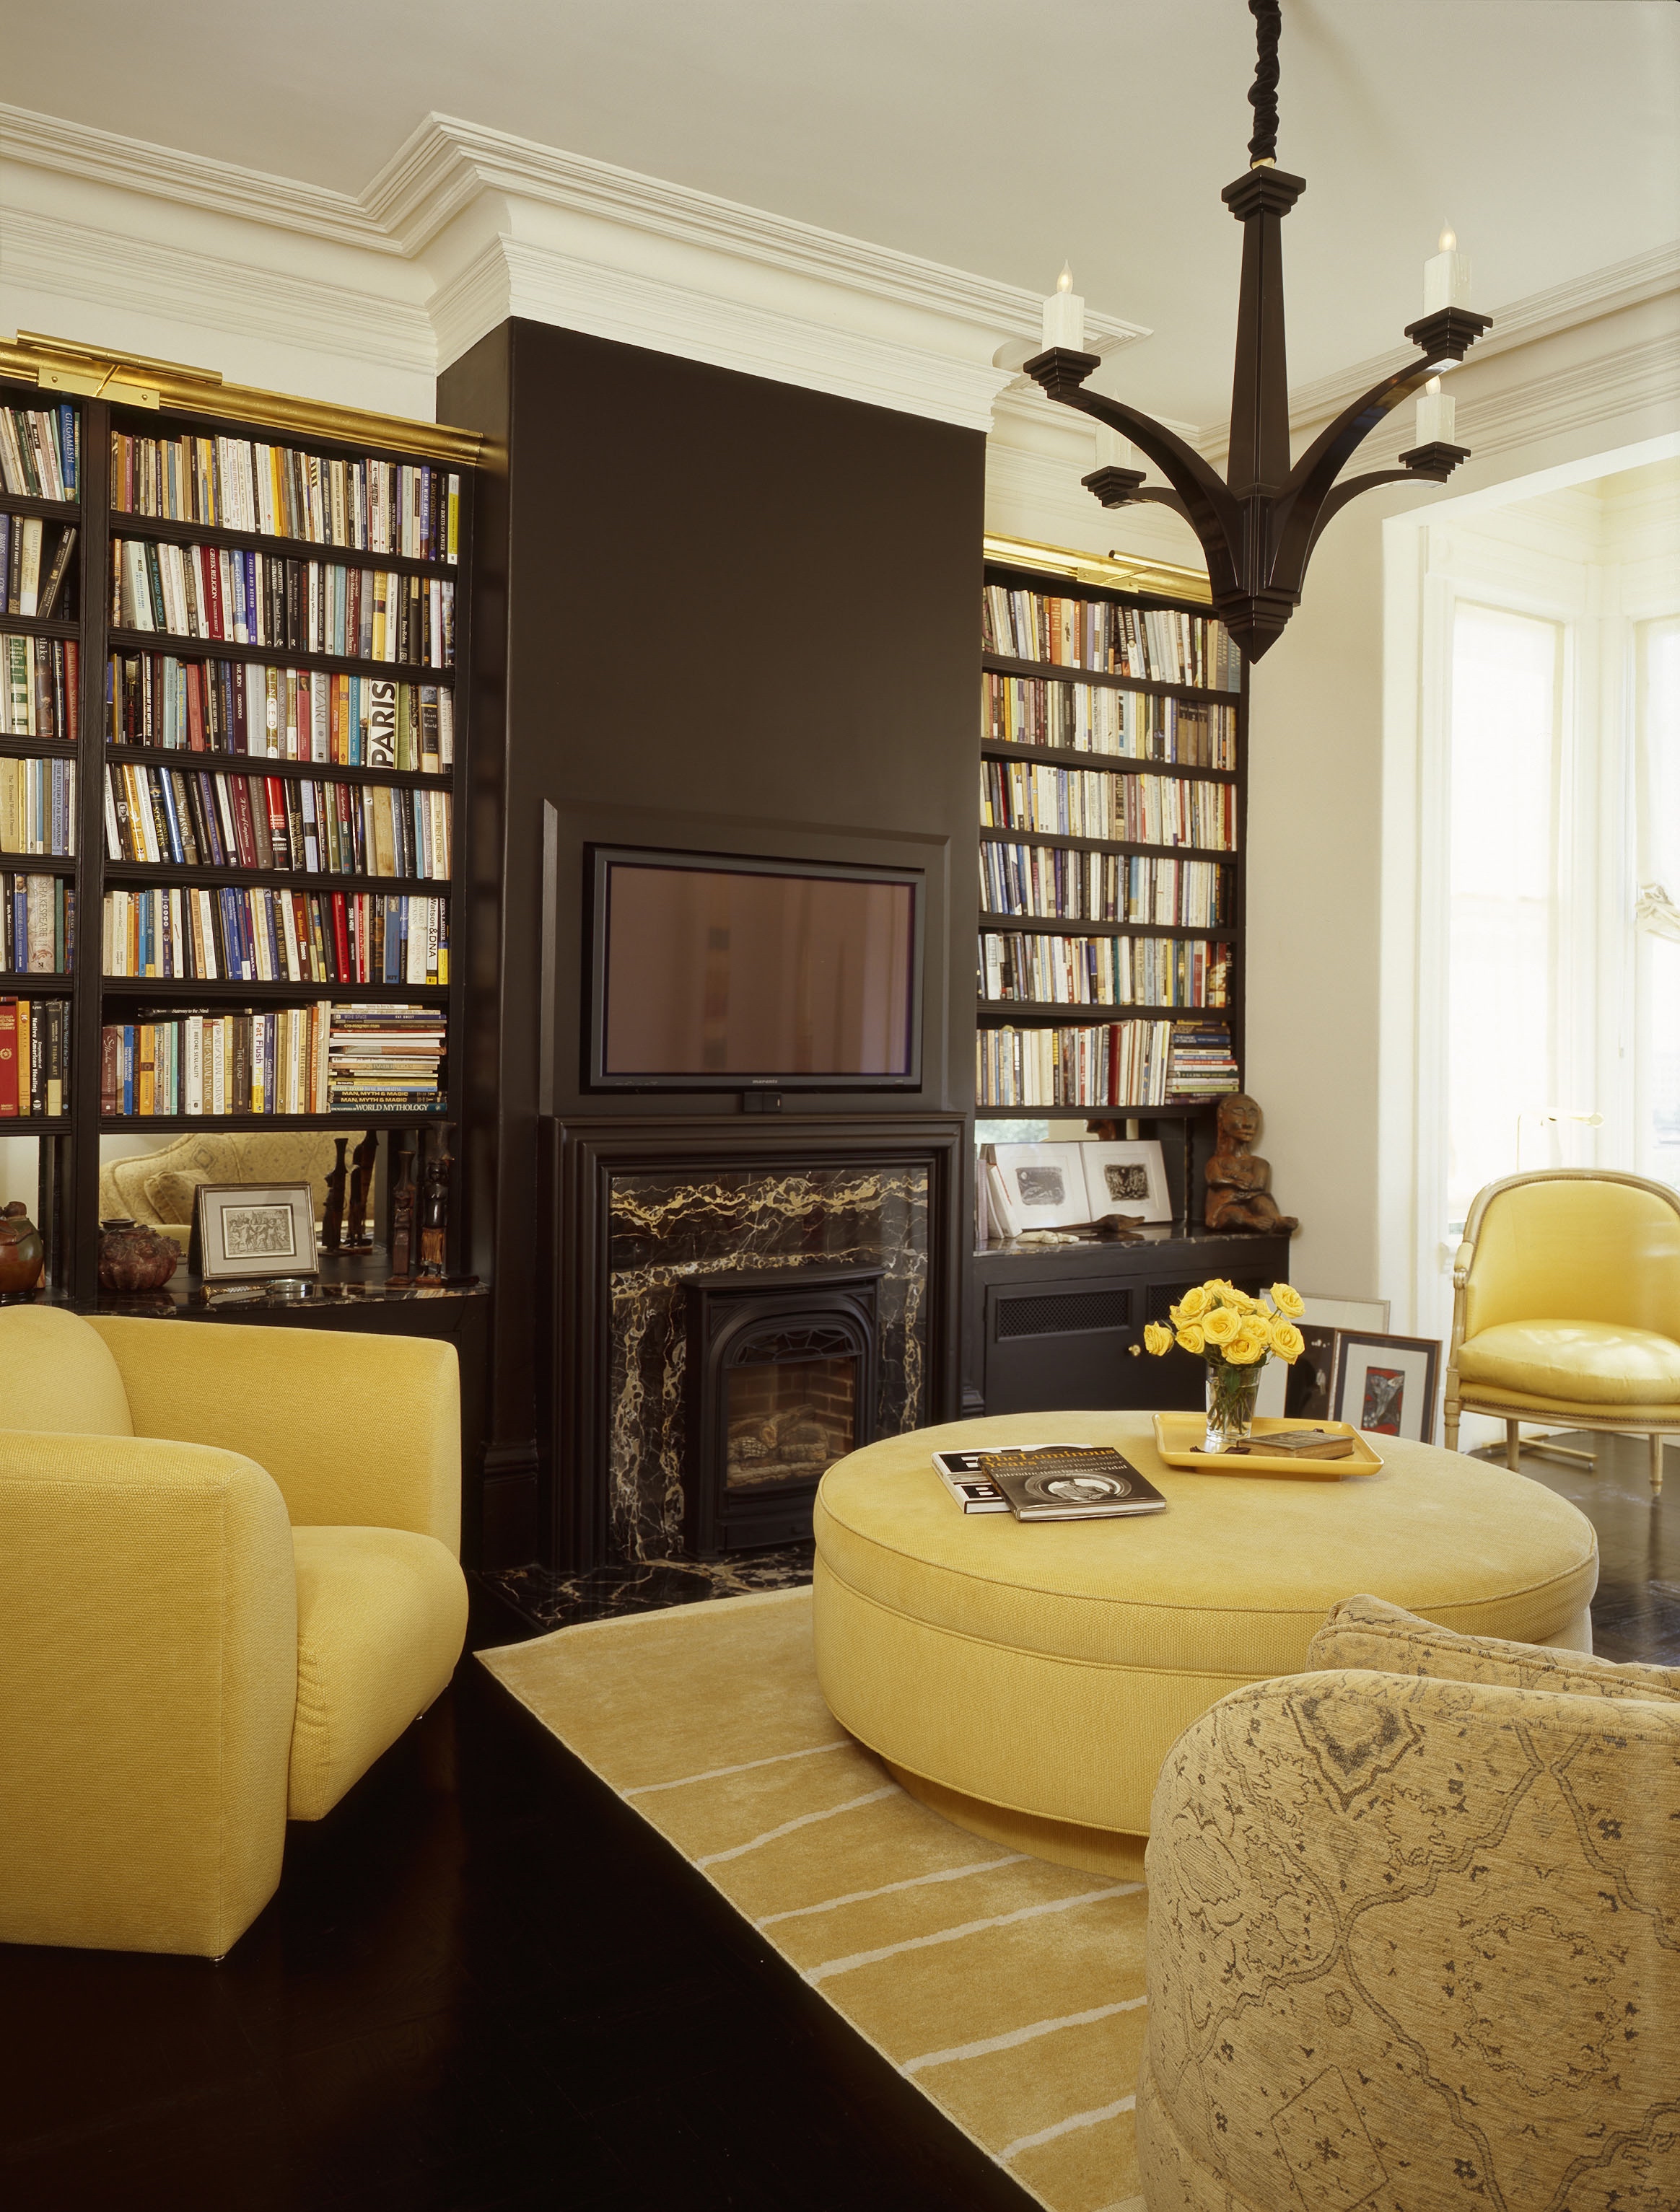 A living room with yellow furniture and a fireplace.